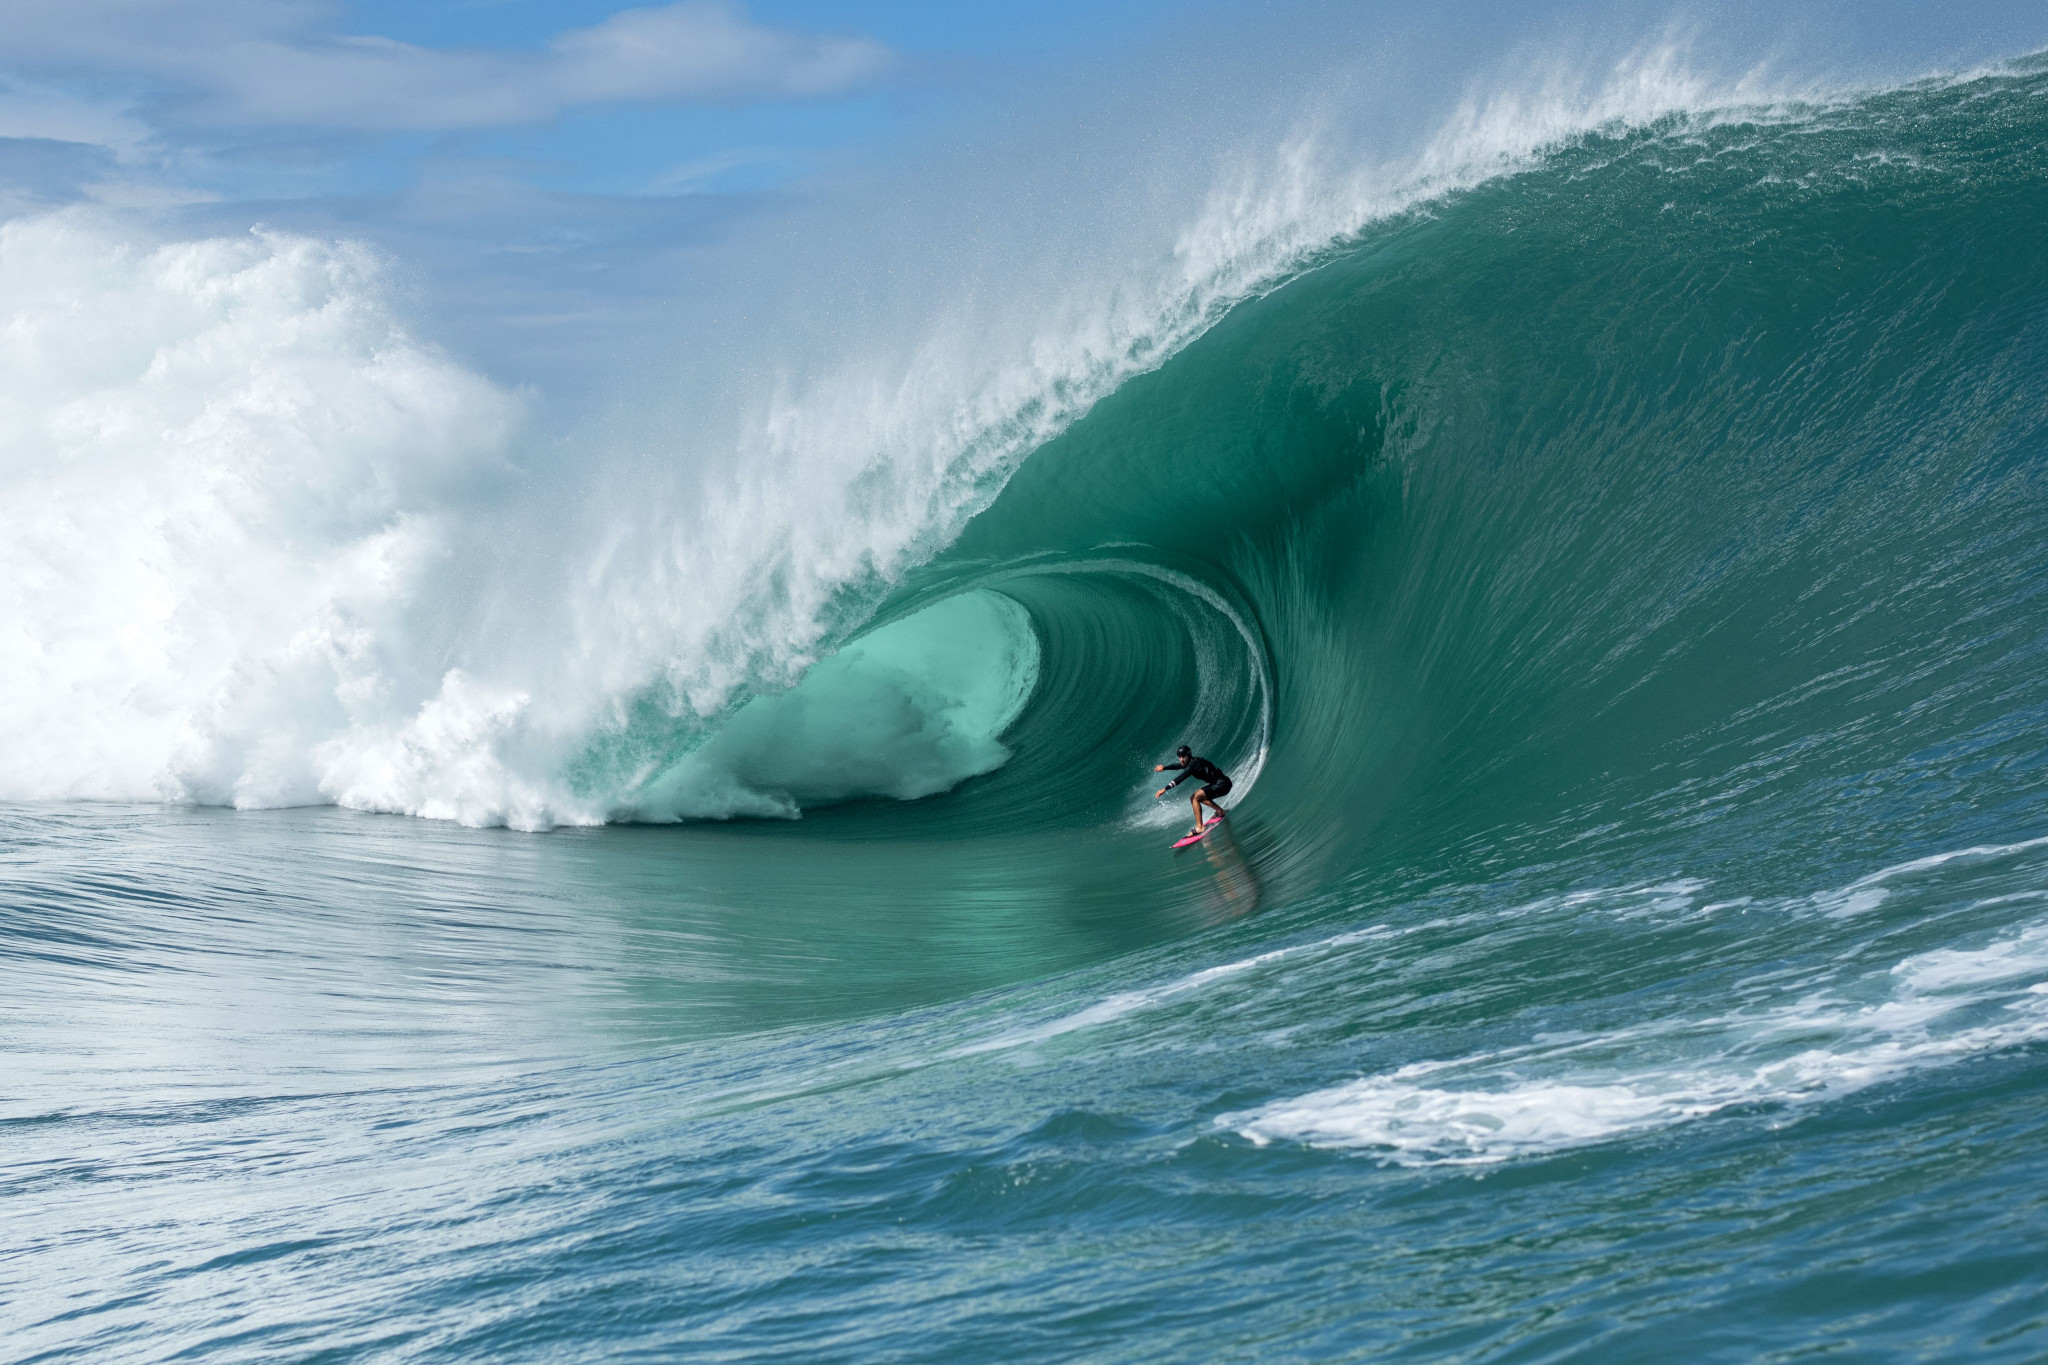 Tahiti's Teahupo'o wave is due to host the Paris 2024 Olympic surfing competition ©Getty Images